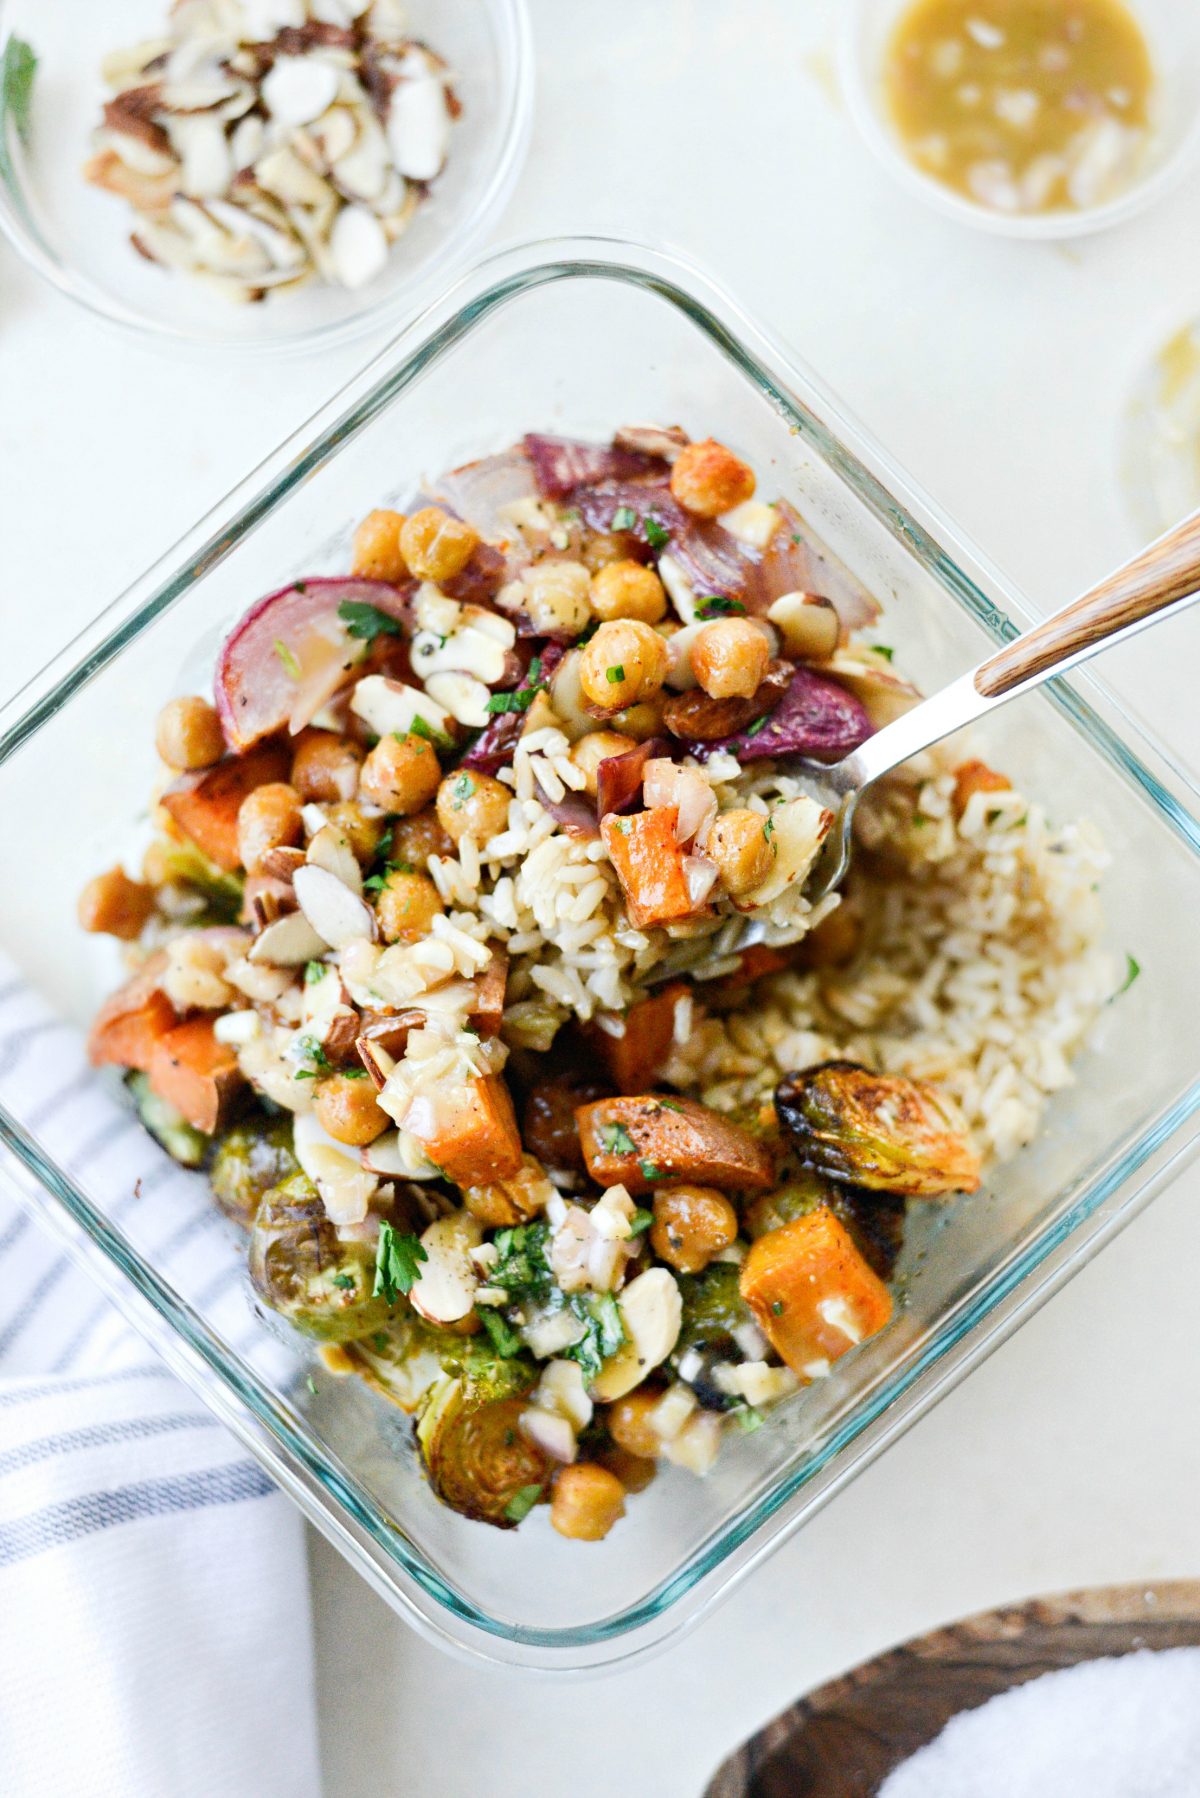 Roasted Fall Veggie Rice Bowls (Meal Prep!) l SimplyScratch.com